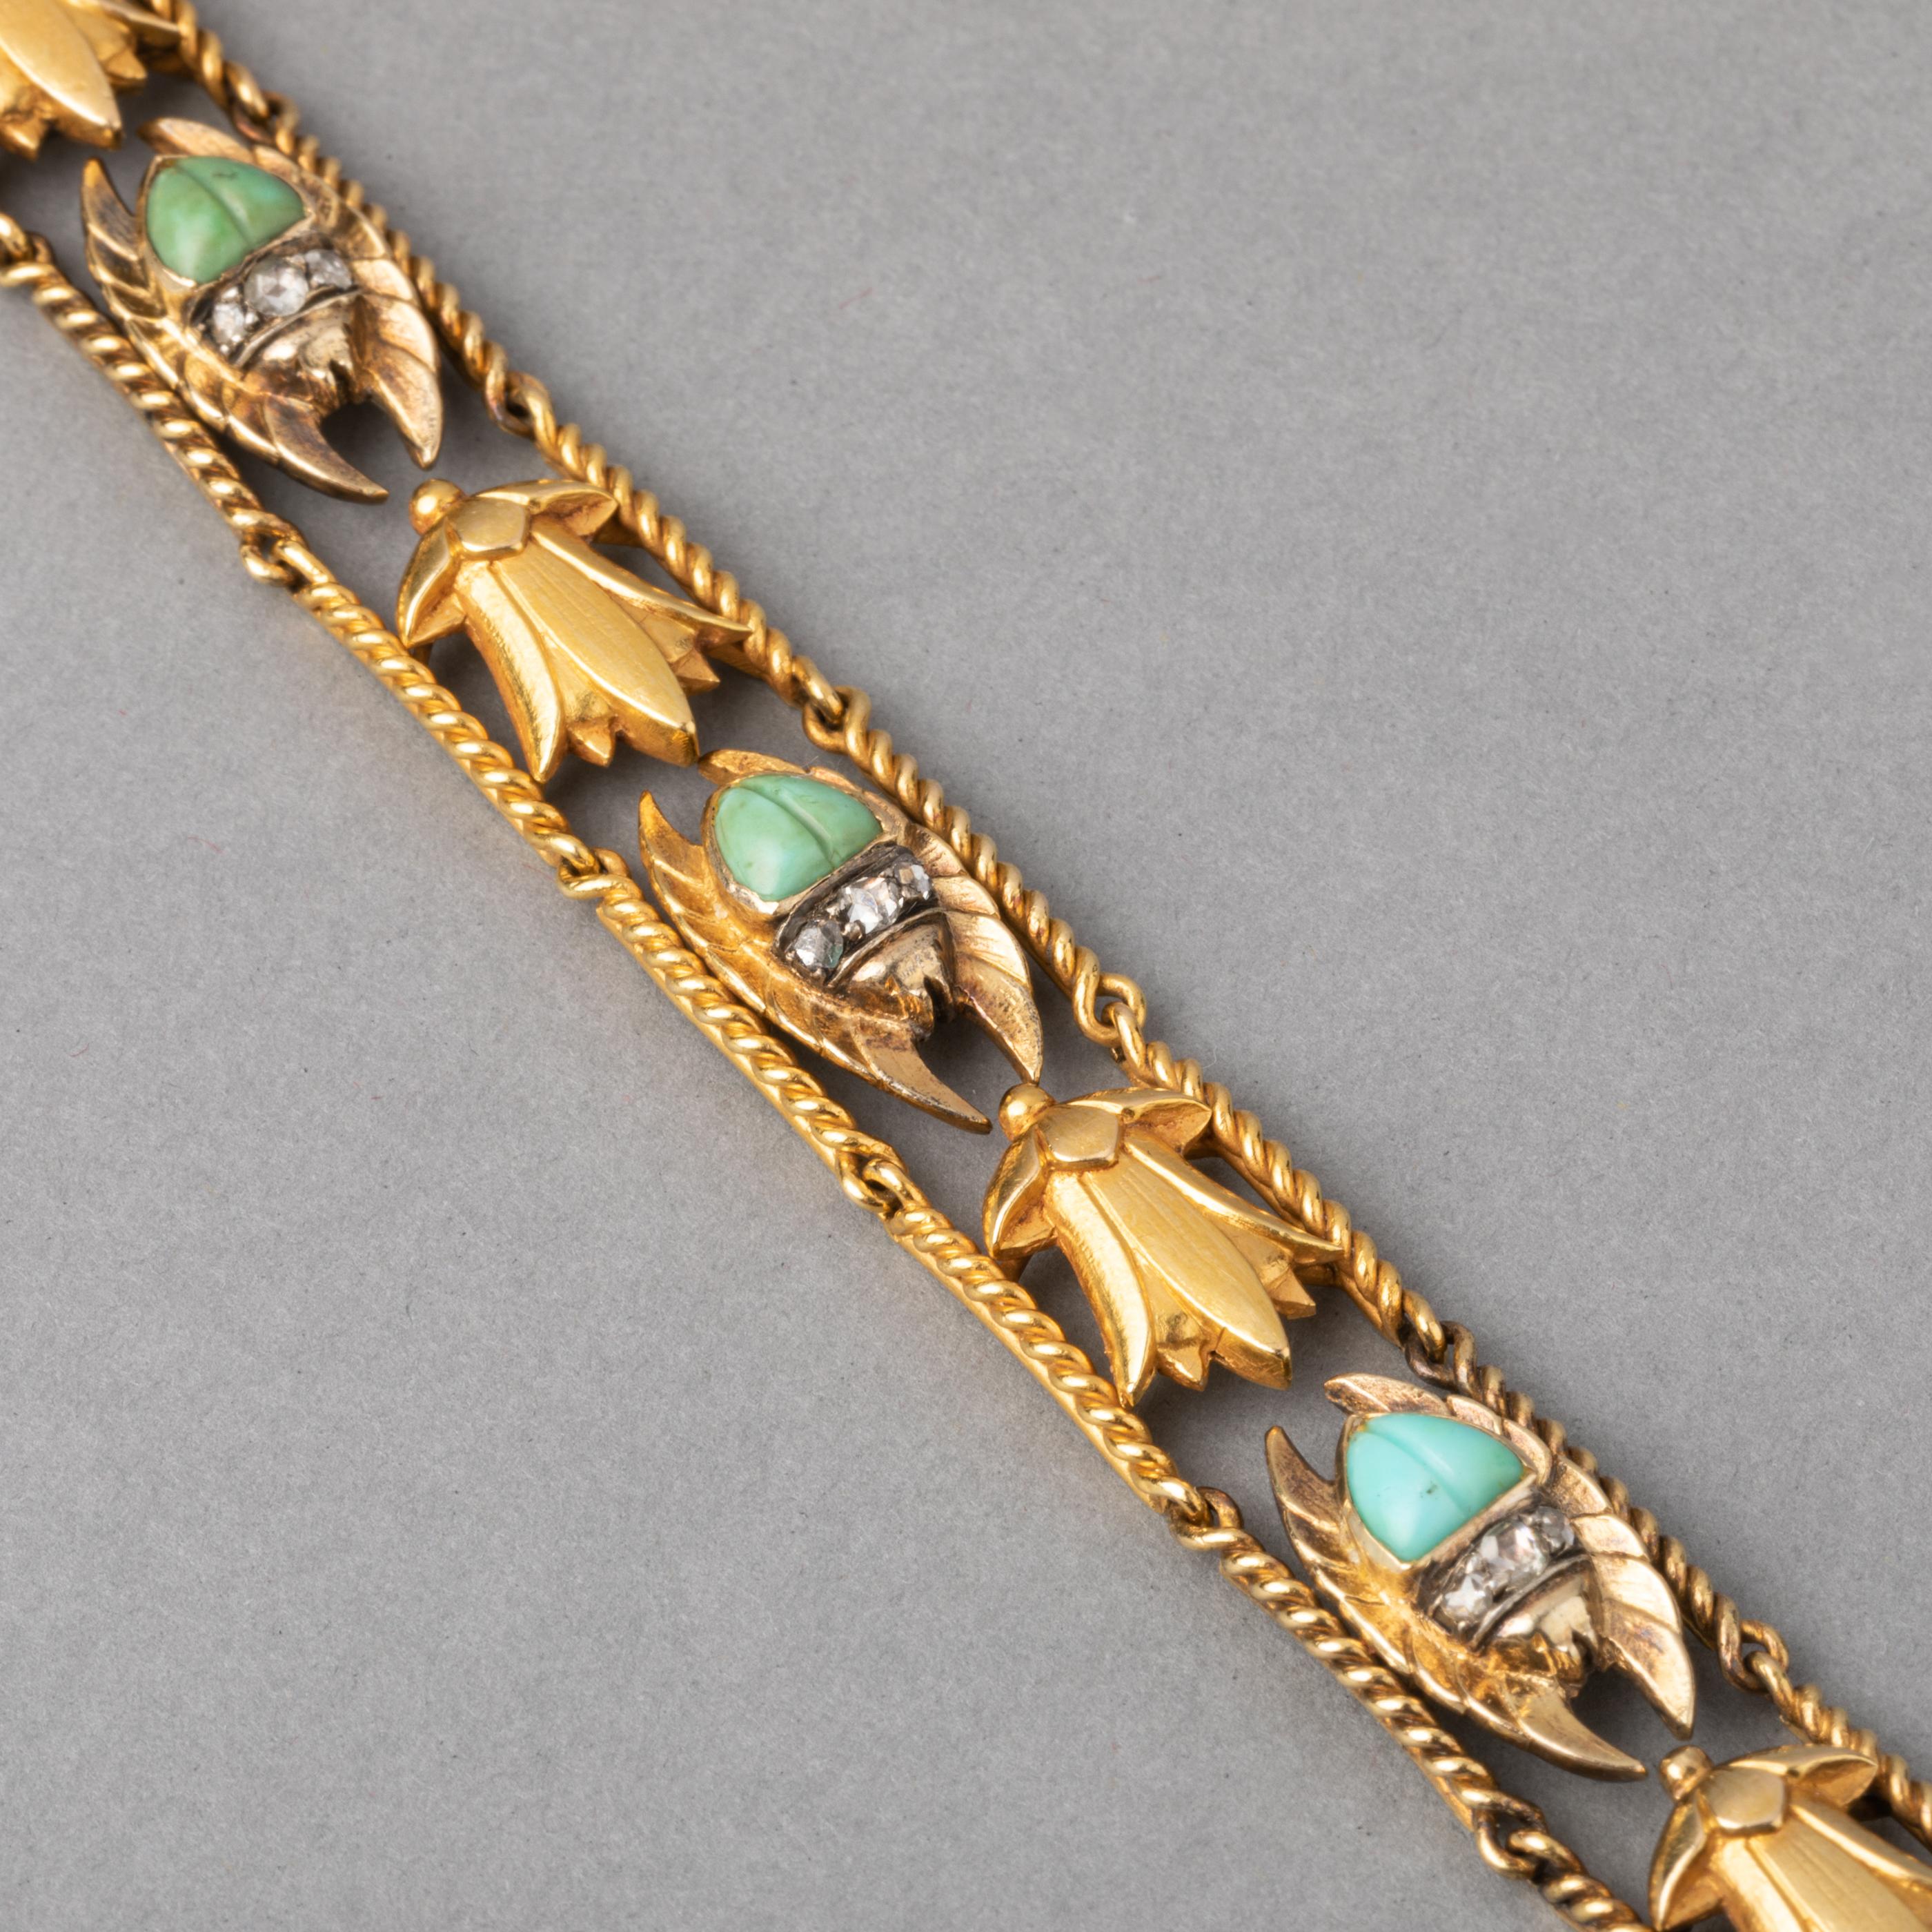 Gold and Turquoises Antique French Egyptian Revival Bracelet For Sale 2